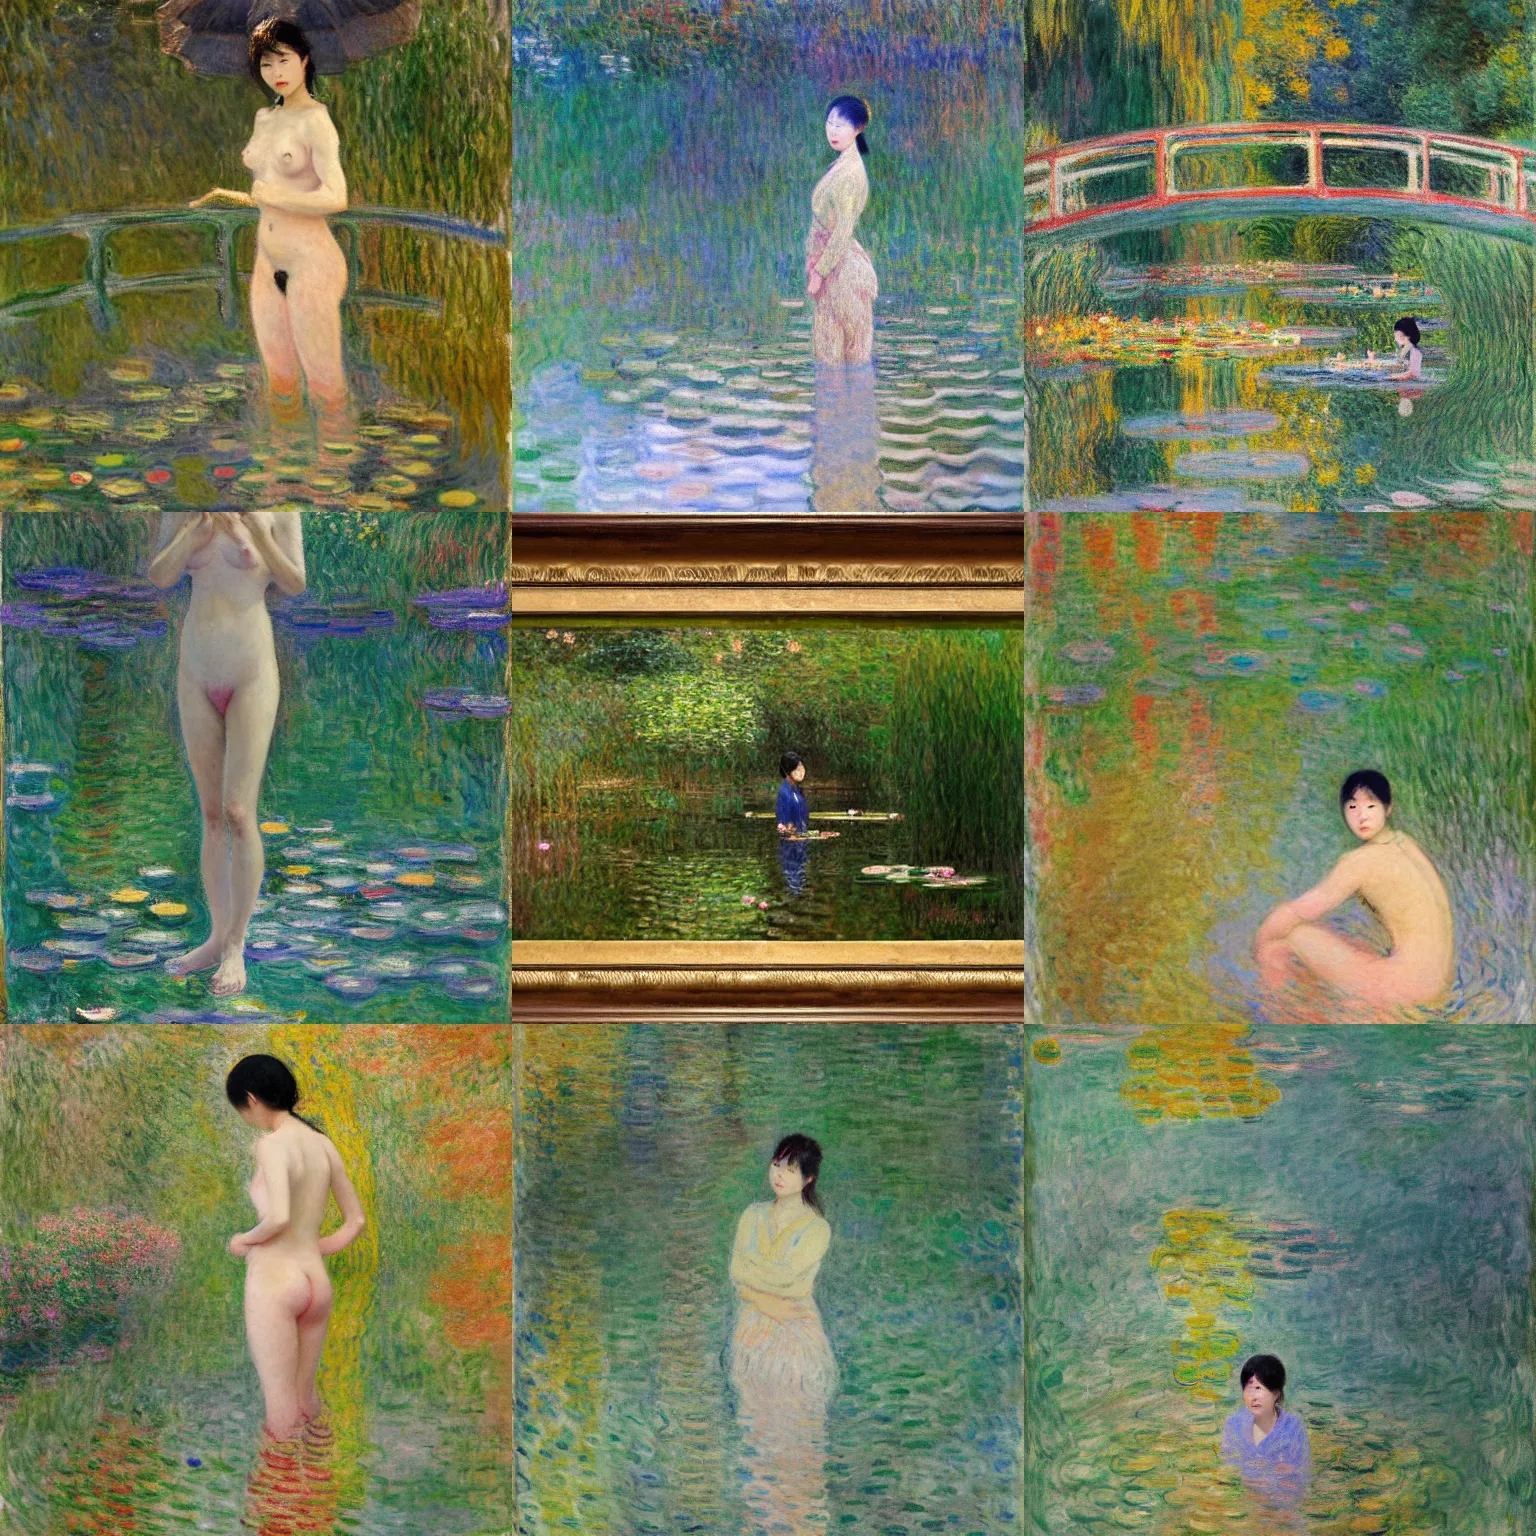 Prompt: lee jin - eun emerging from gold pond by nicola samuri and claude monet, rule of thirds, seductive look, beautiful